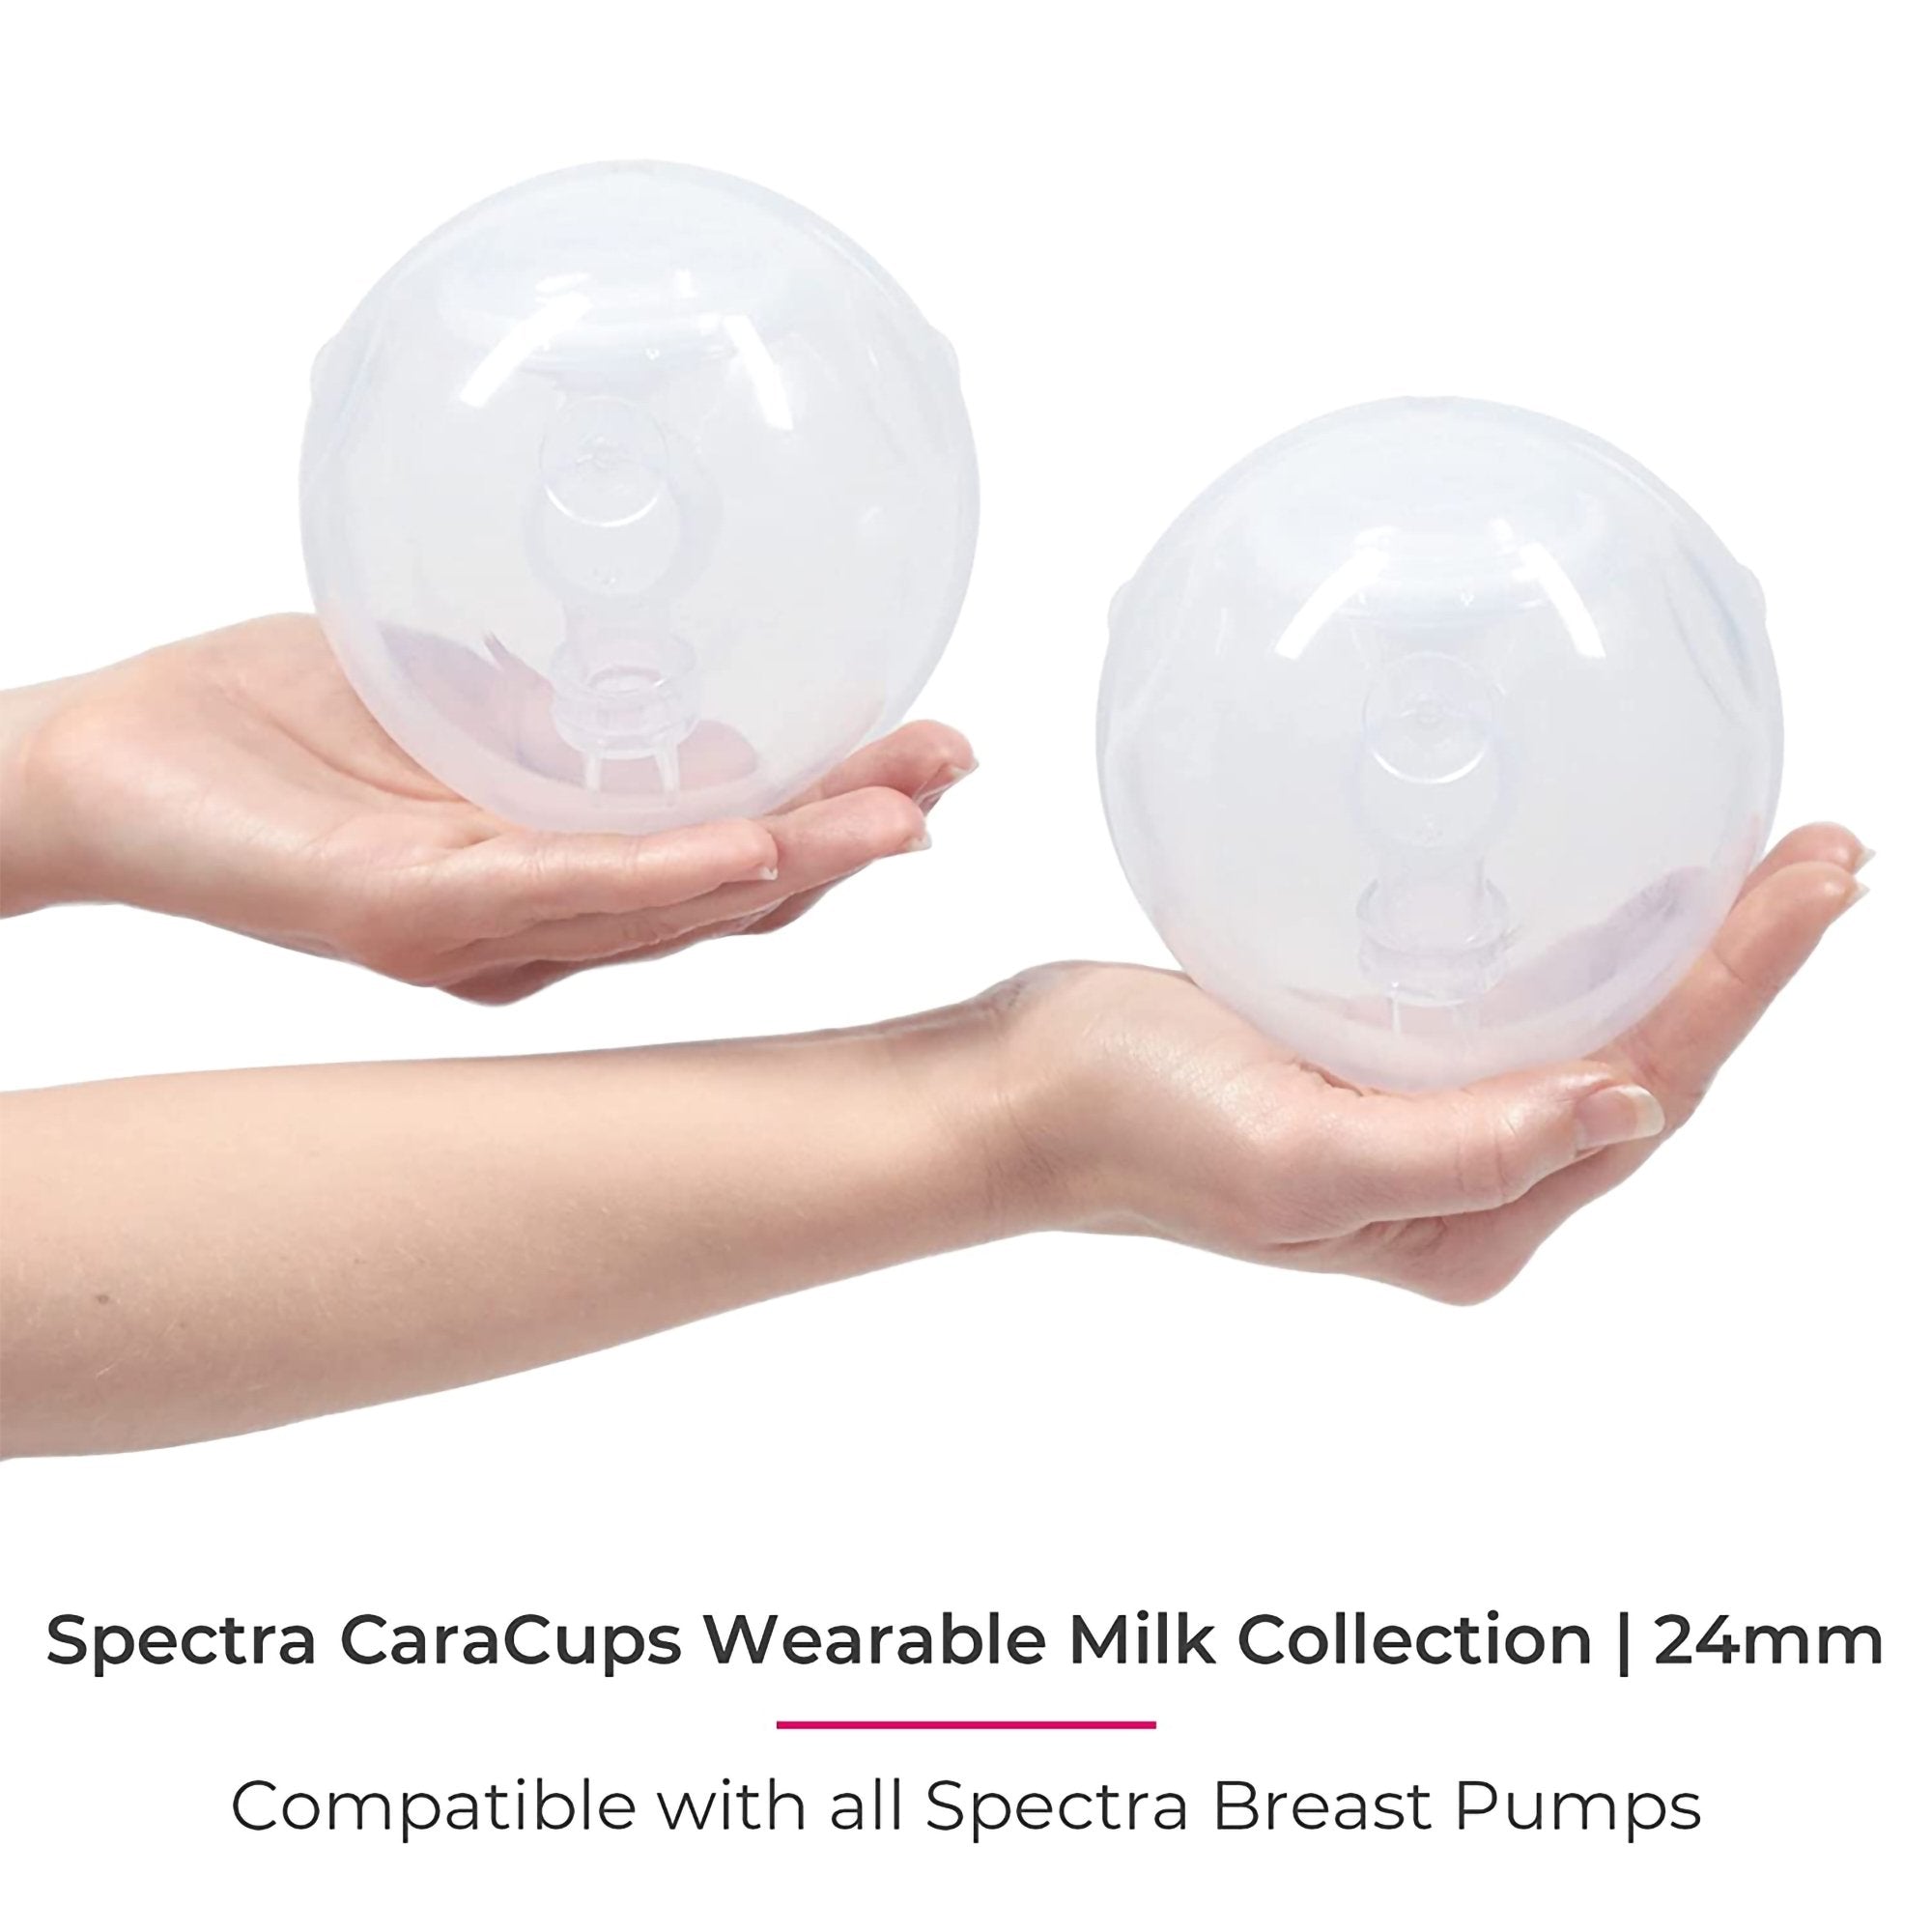 Wearable Milk Collection Kit Spectra® CaraCups For Spectra® Breast Pumps